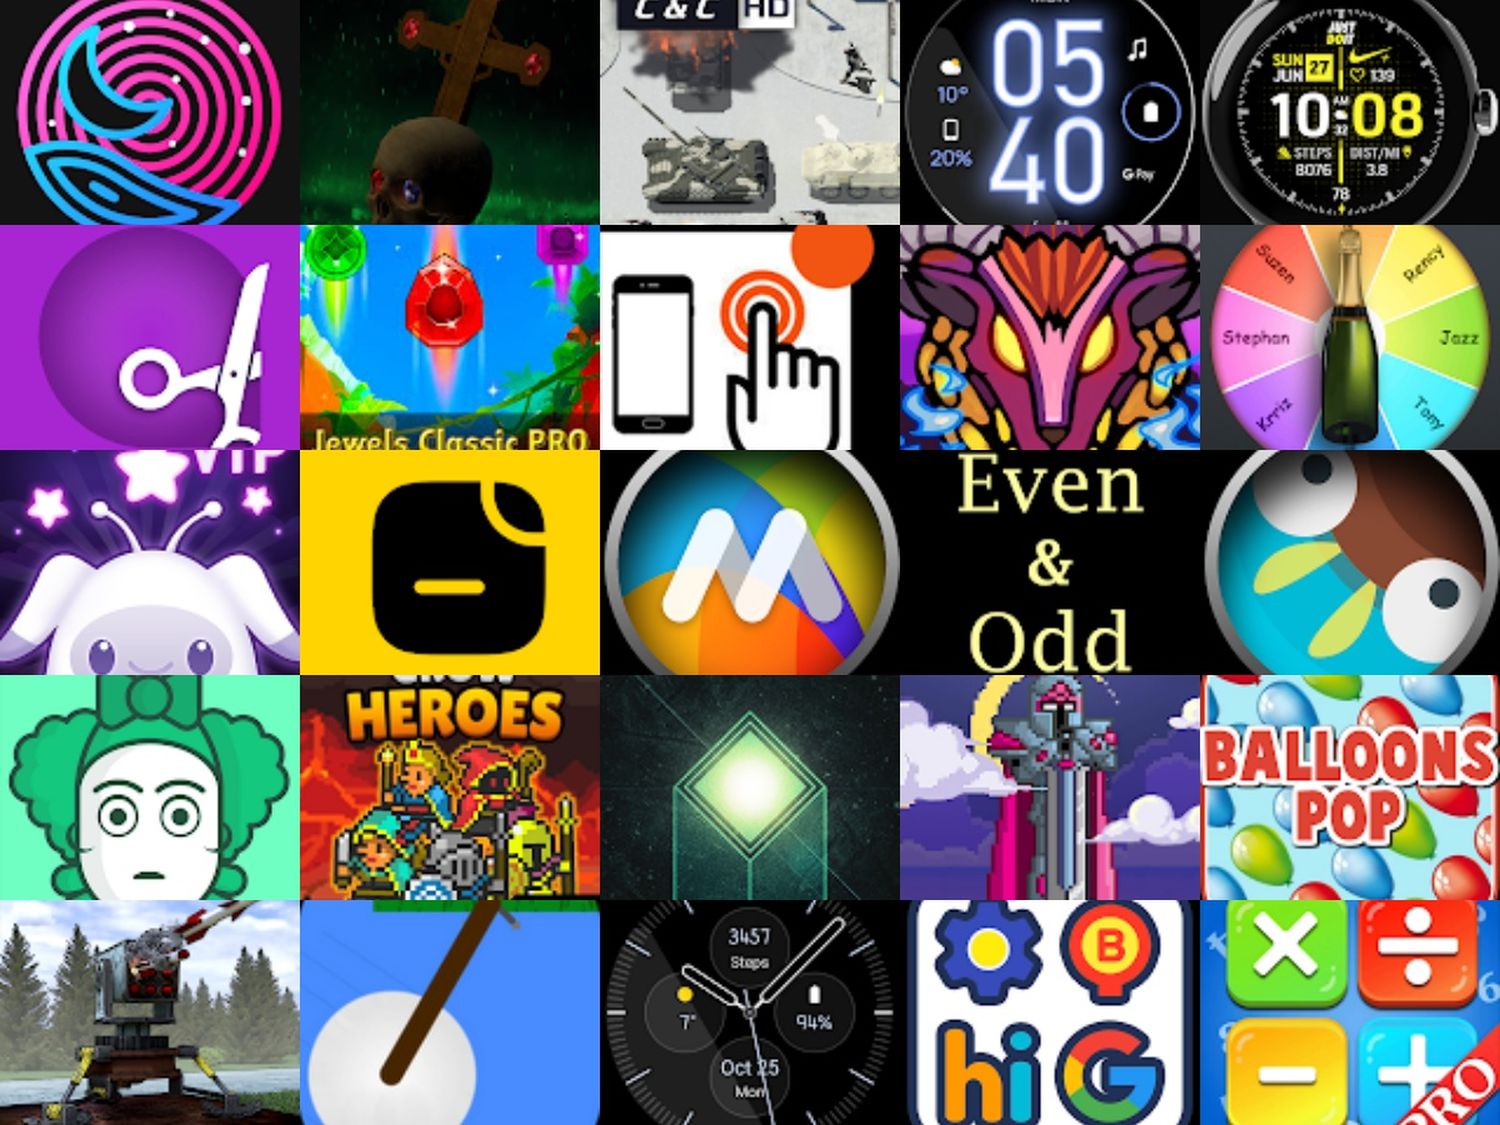 Google-Play-Store-Aktion-Diese-57-Android-Apps-Spiele-Icon-Packs-Live-Wallpaper-gibt-es-heute-Gratis